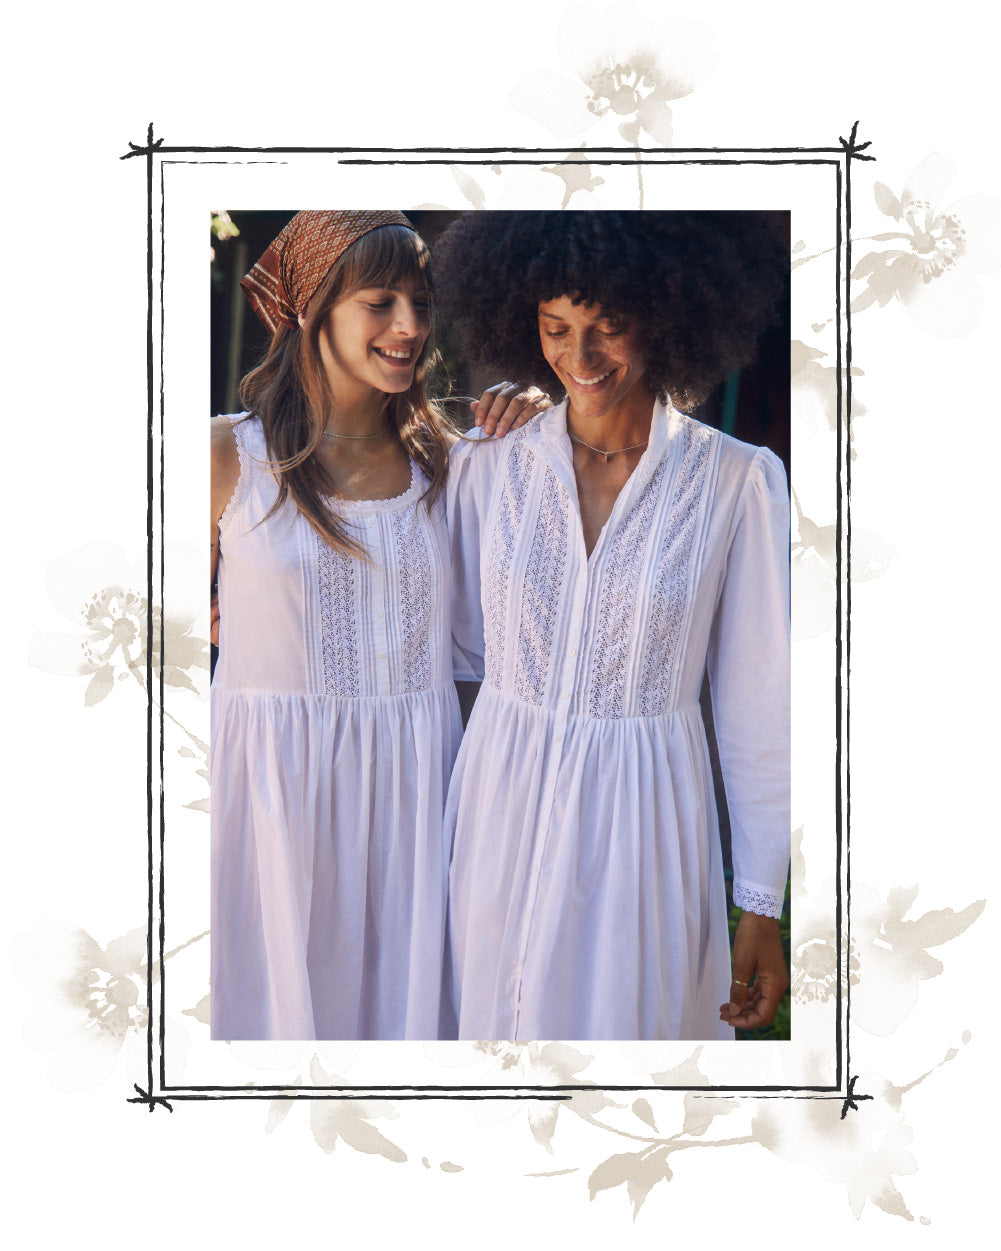 Two ladues wearing white nightgowns